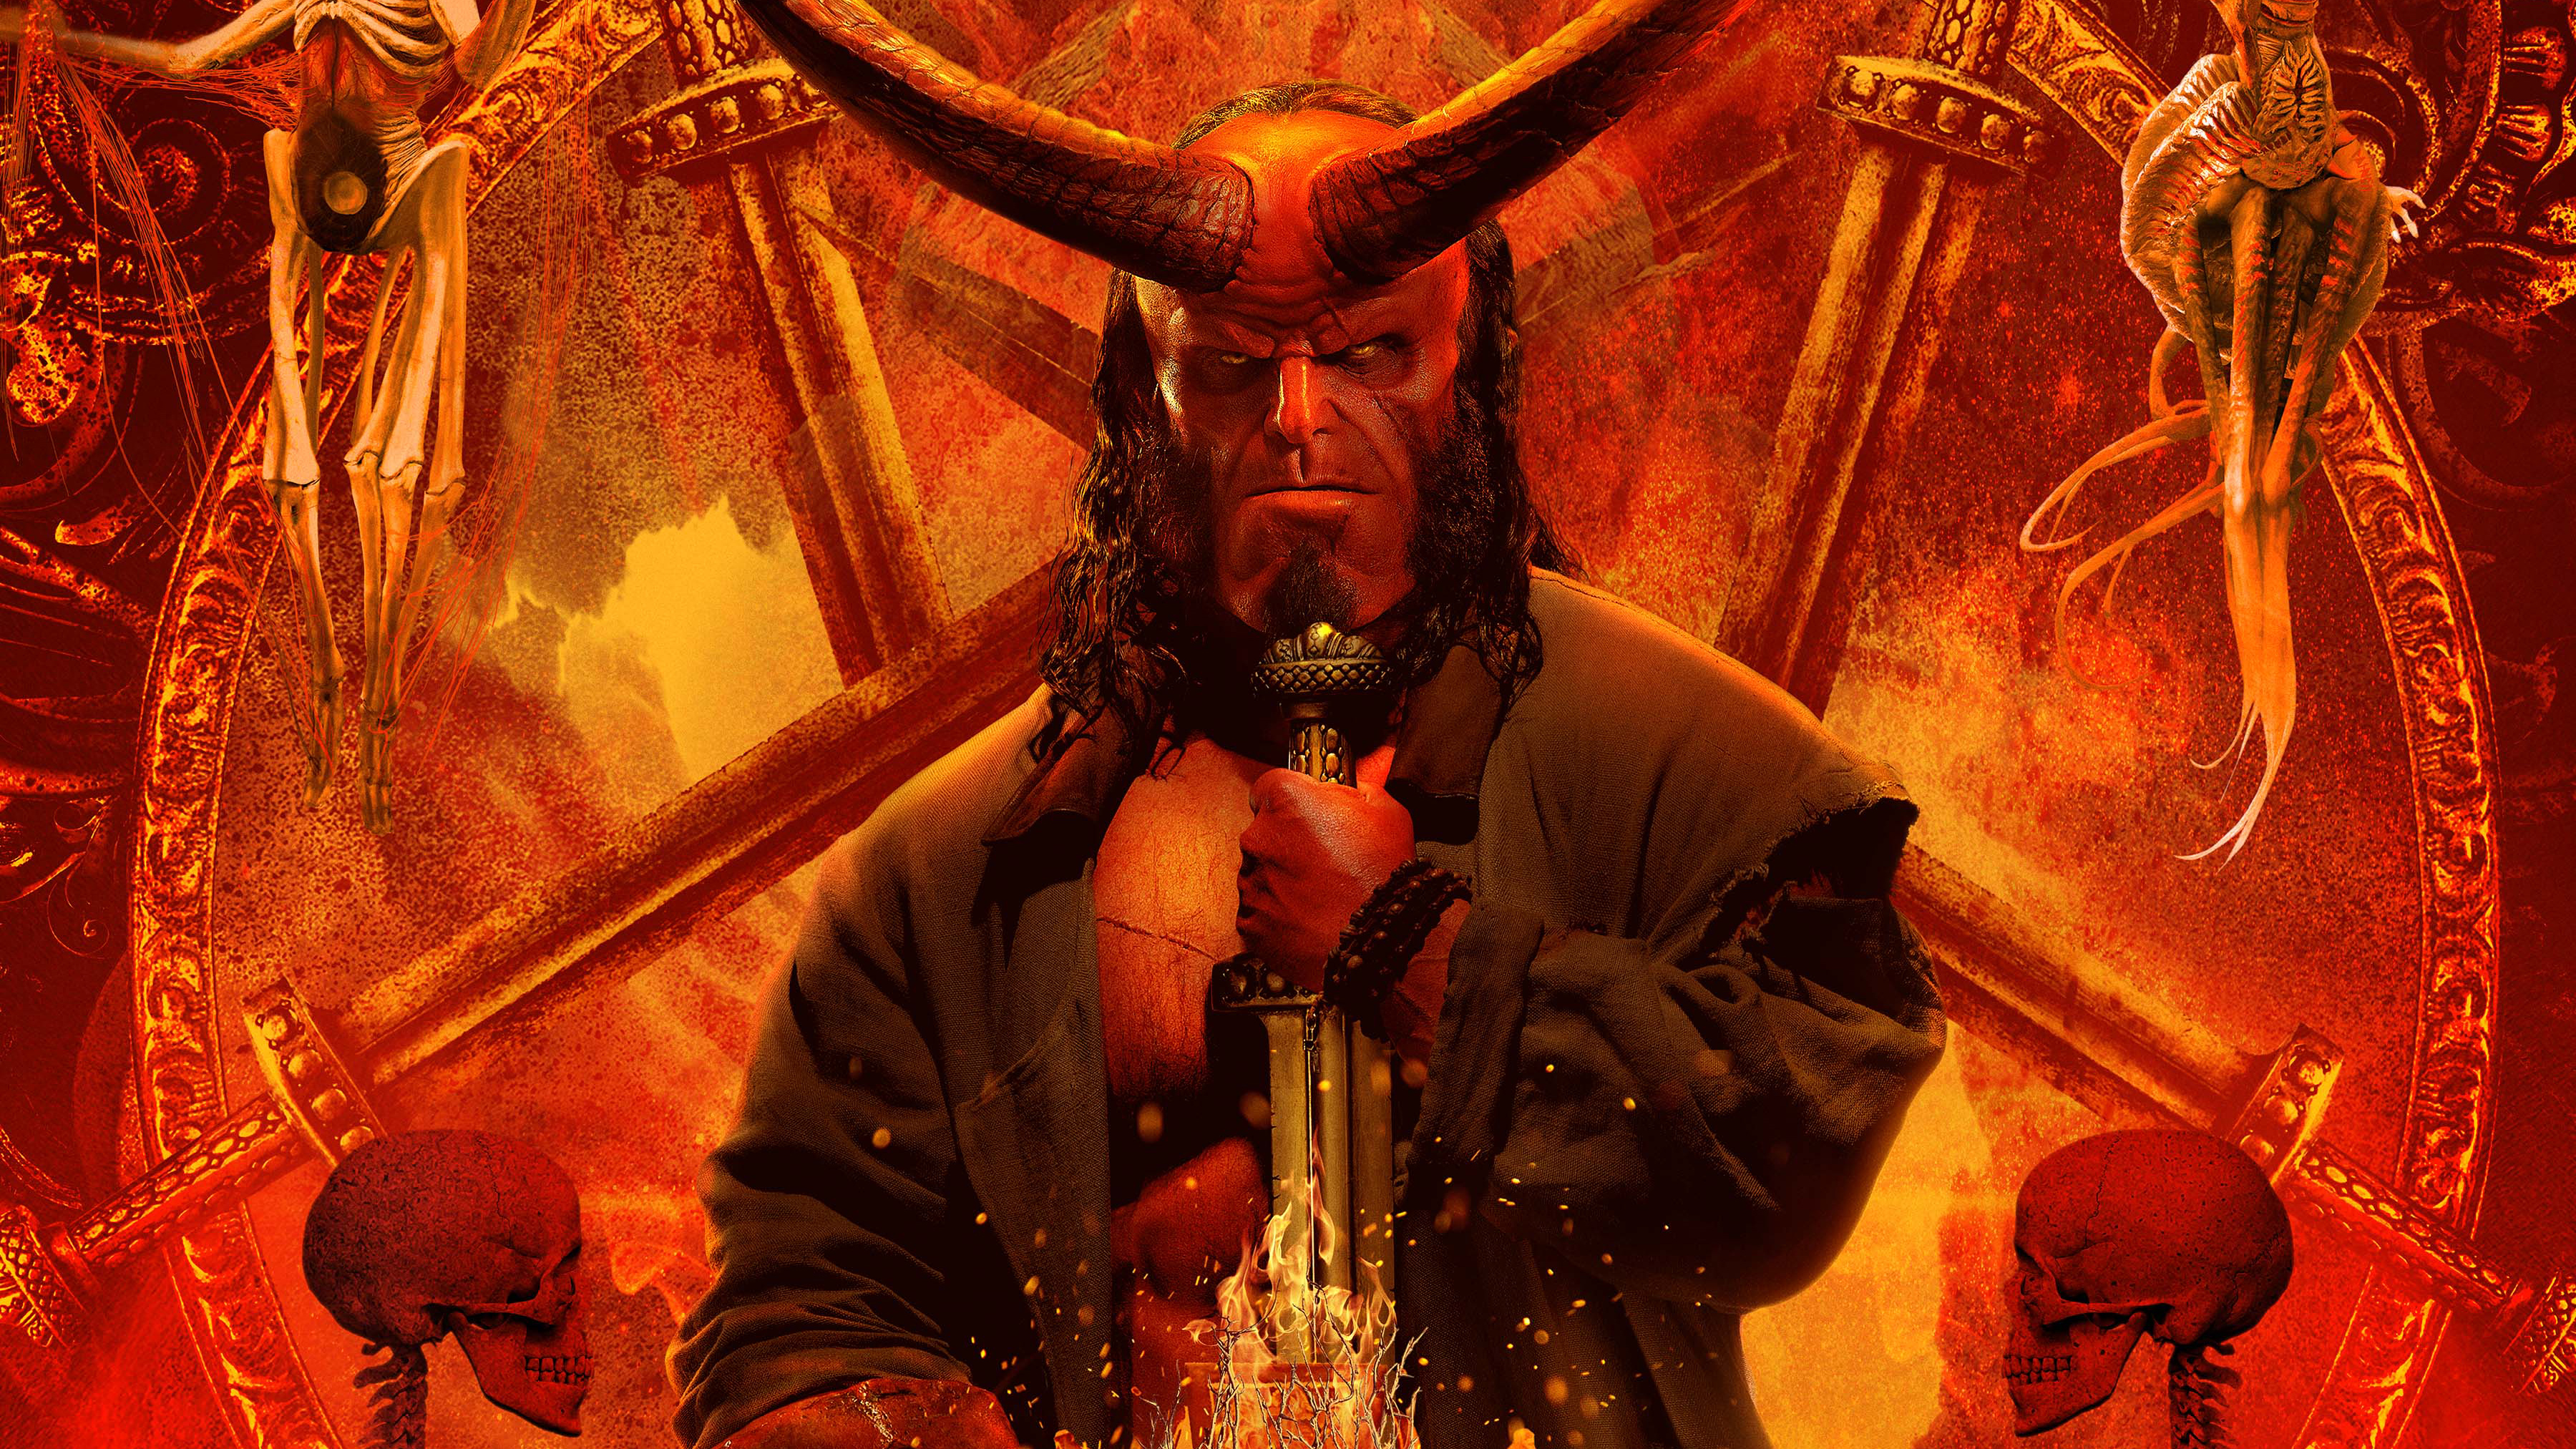 Wallpapers Hellboy 2019 Movies movies on the desktop